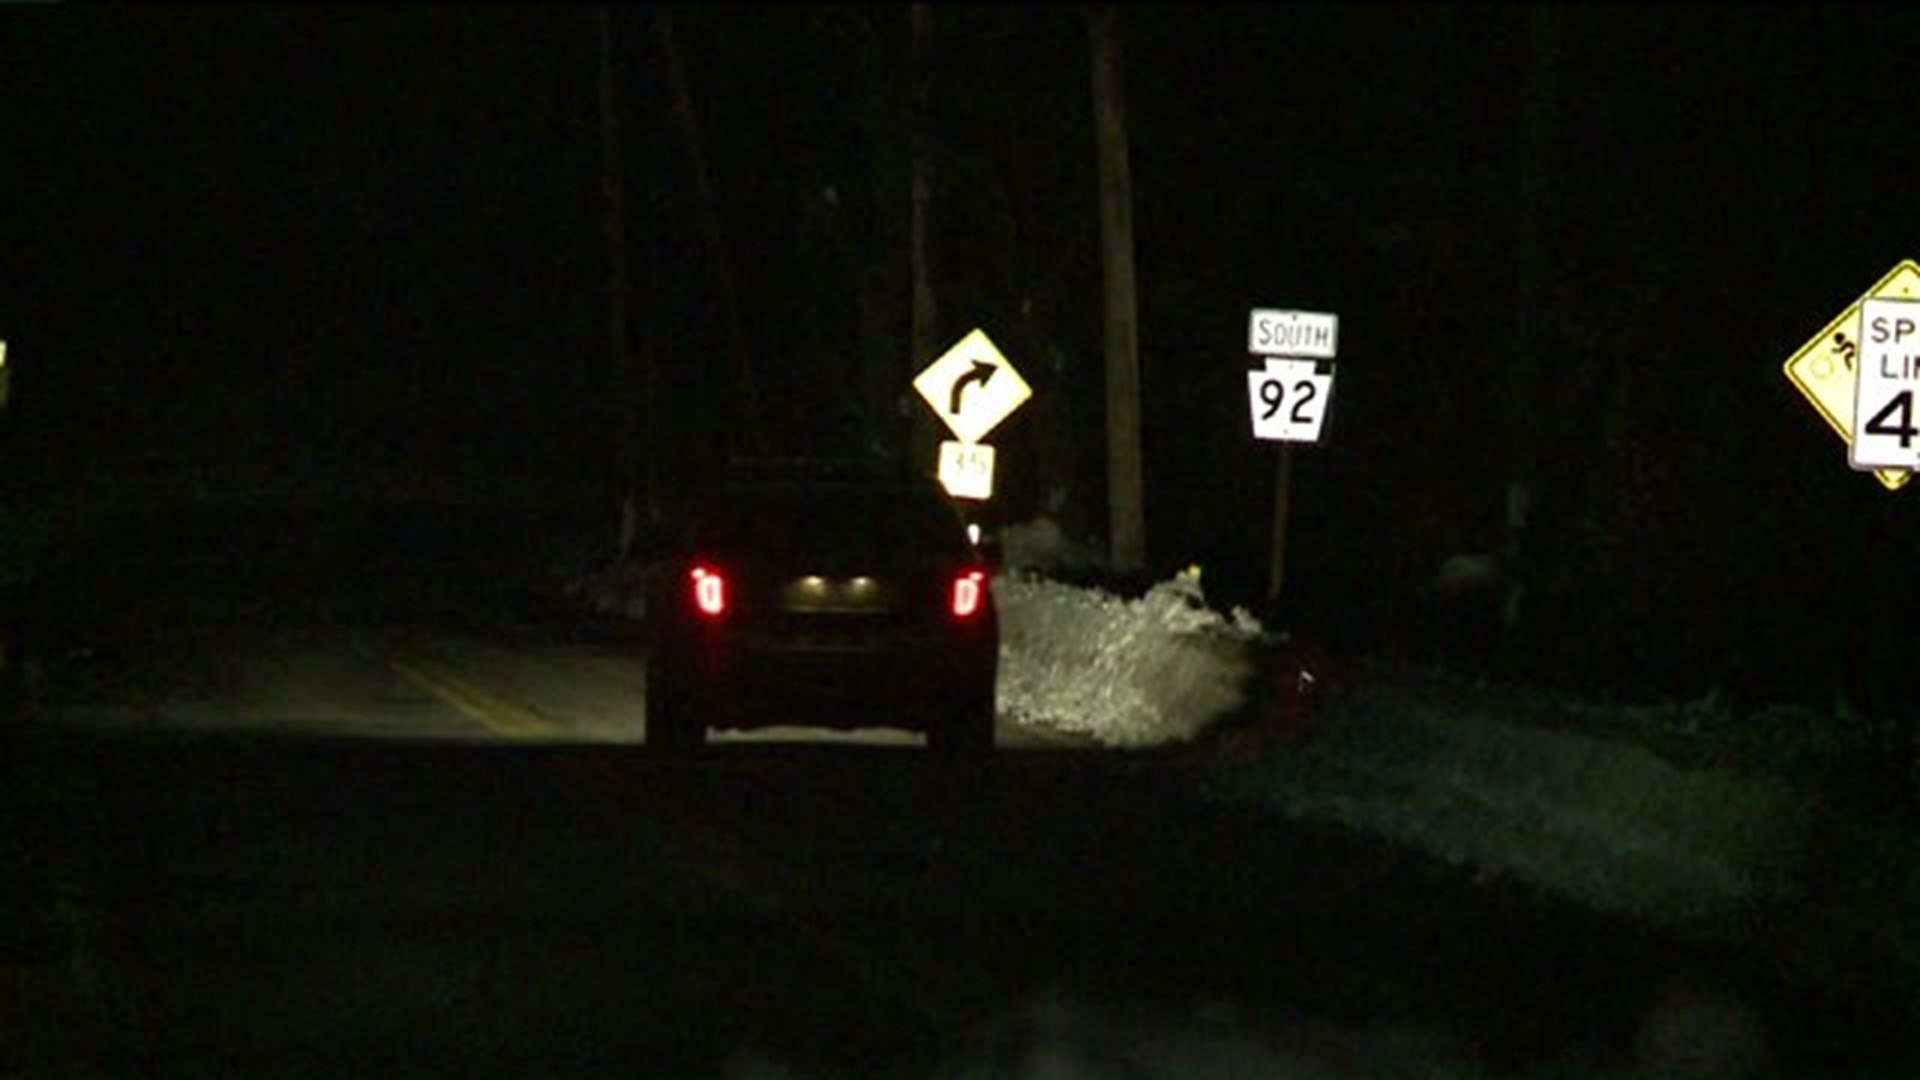 Route 92 Closed in Wyoming County Due to Avalanche